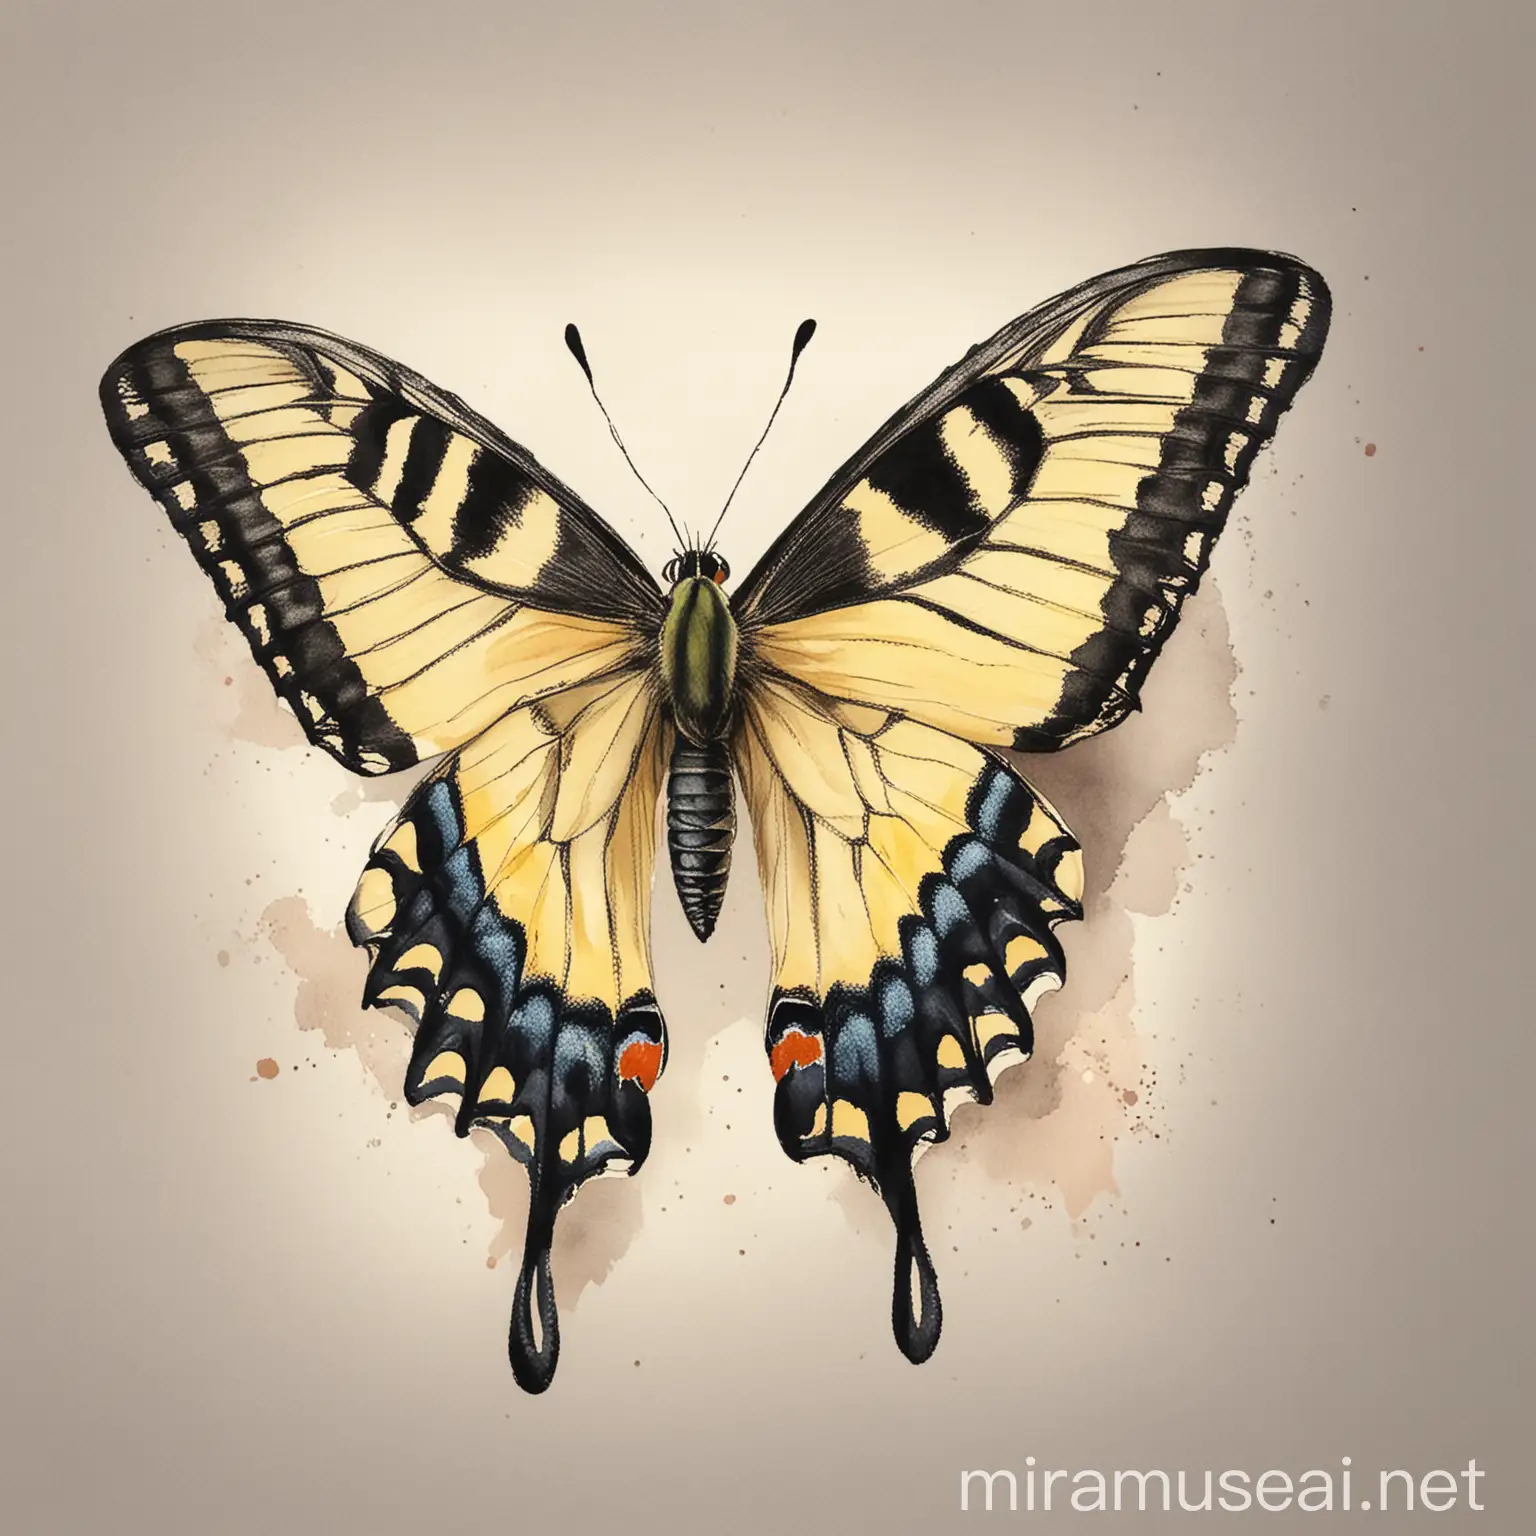 Swallowtail Butterfly Watercolour Illustration on White Background